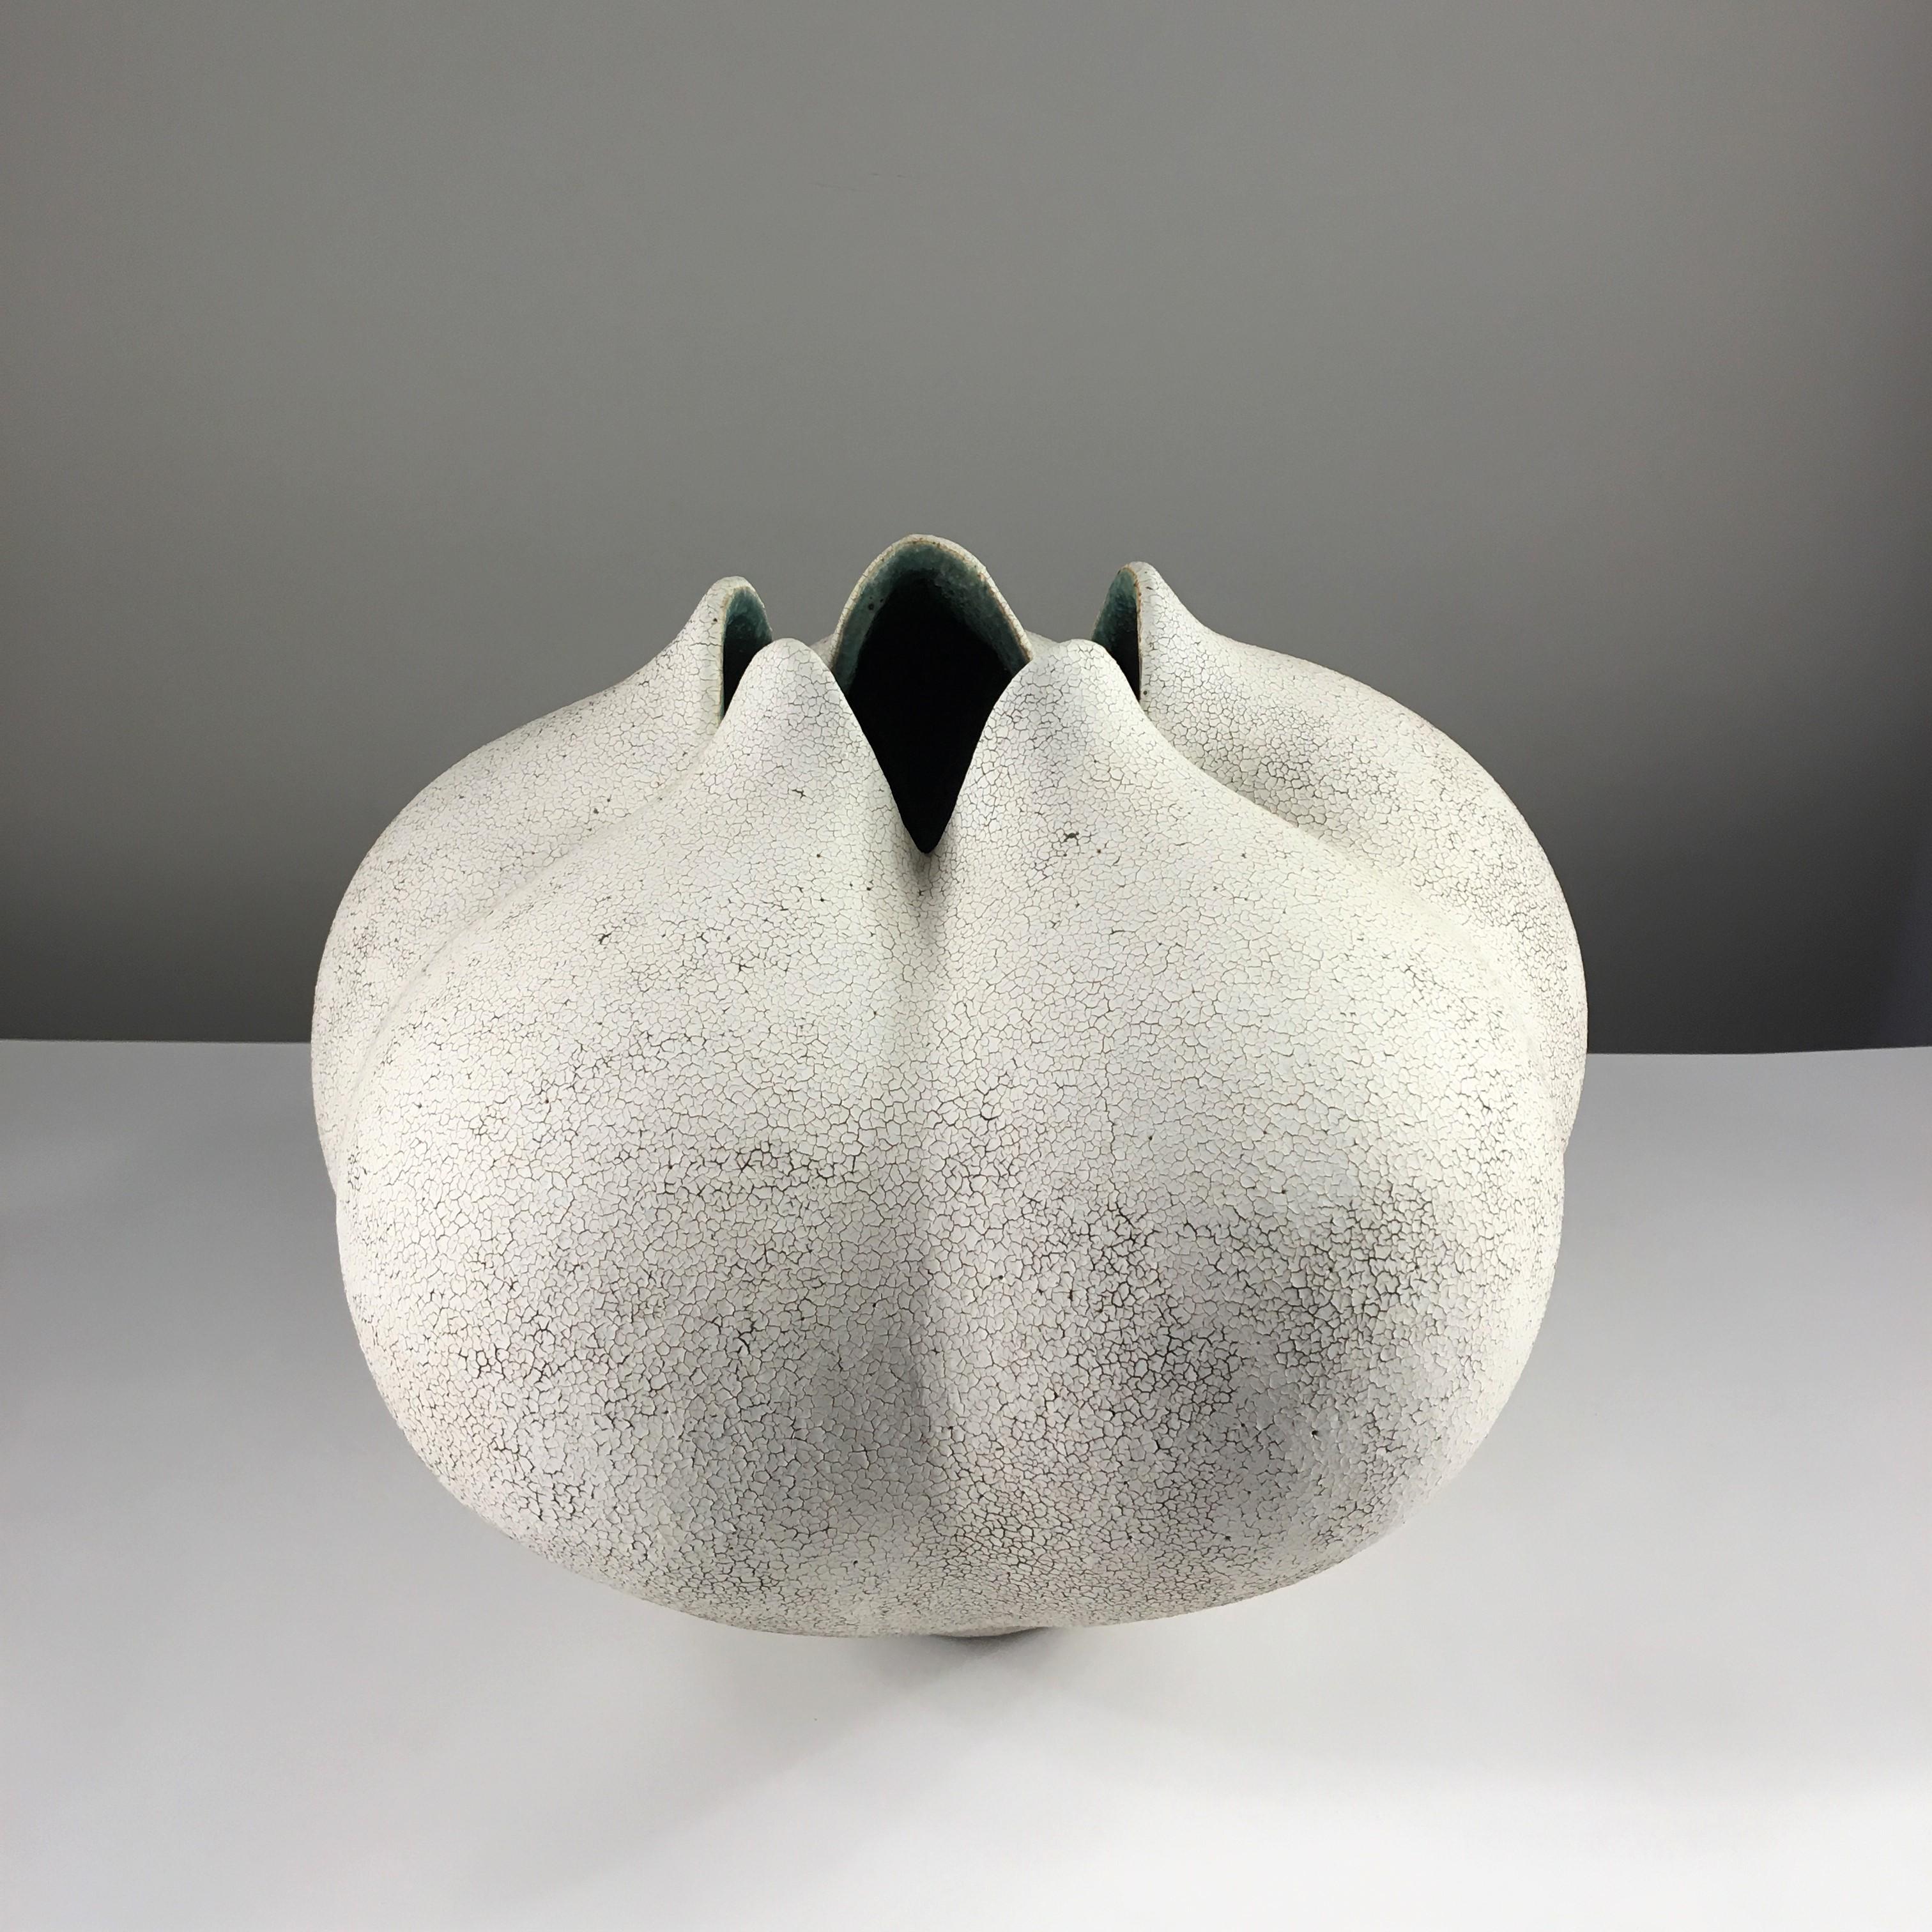 Blossom vase pottery by Yumiko Kuga. Dimensions: Height 10